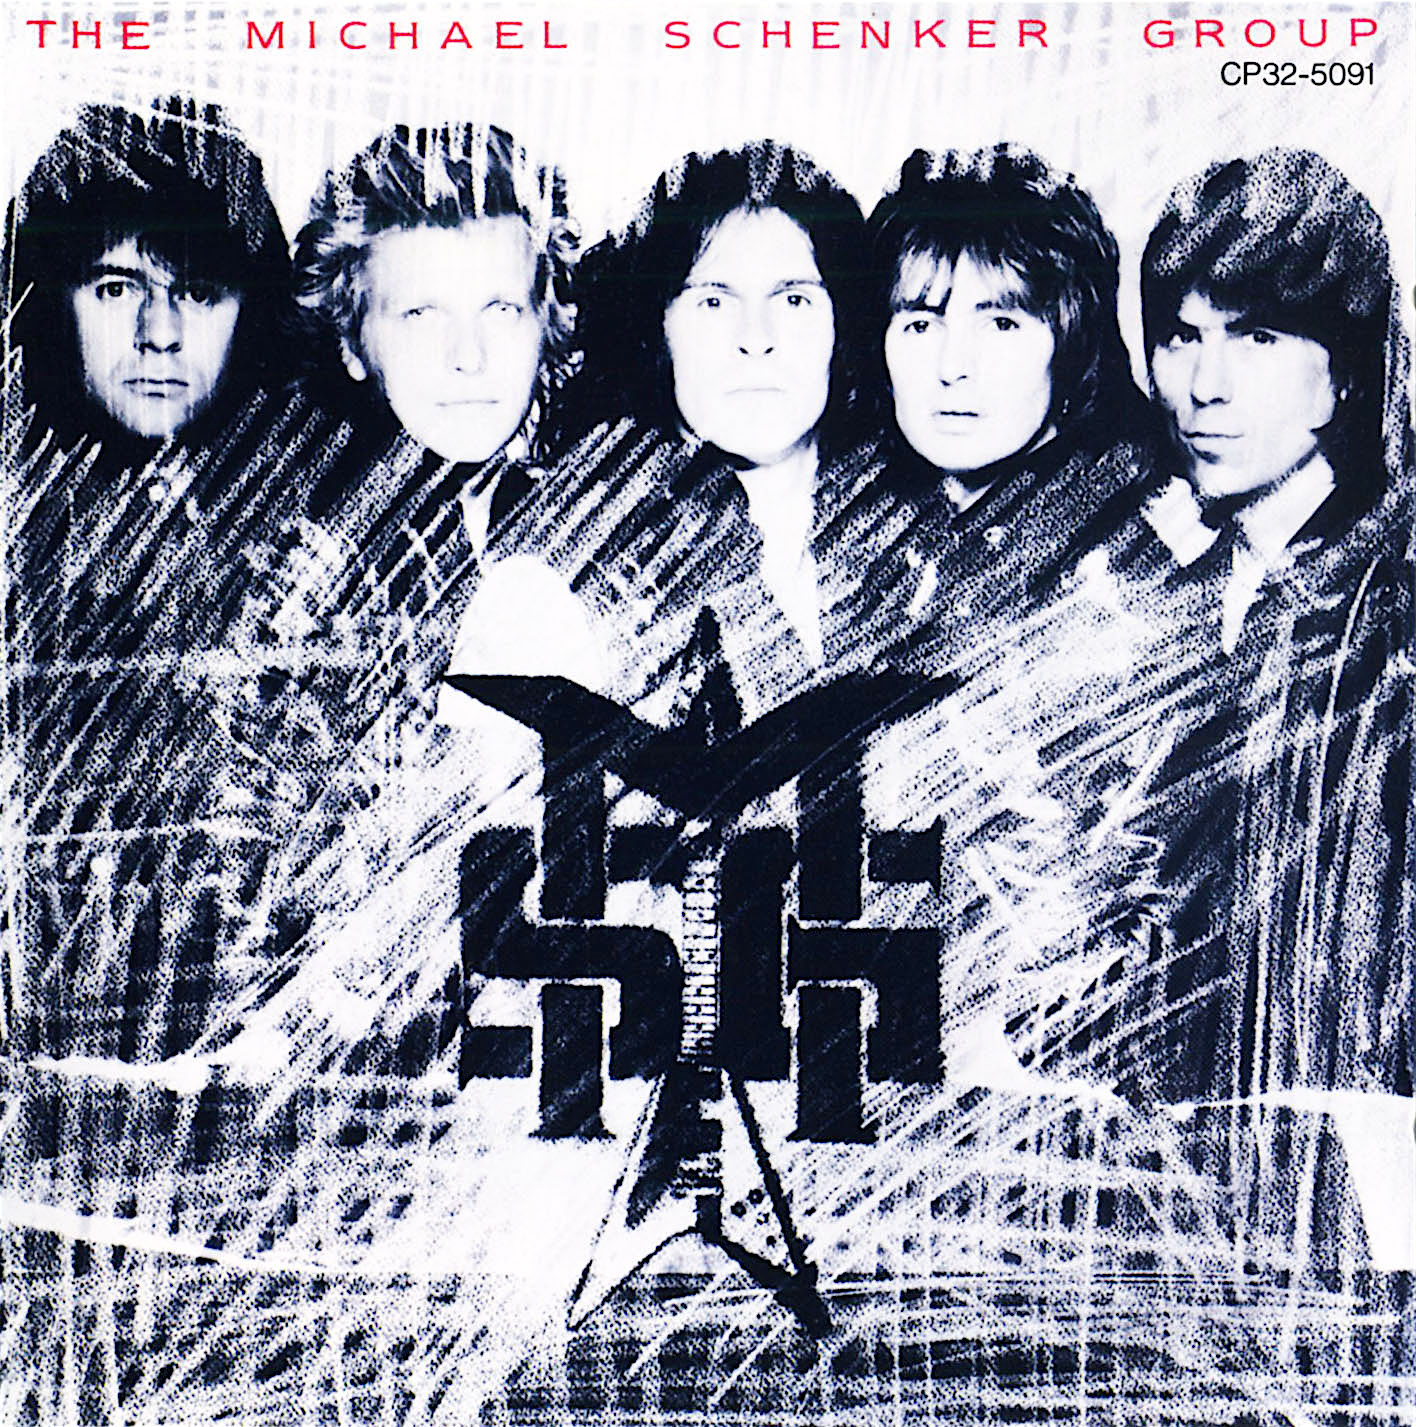 MICHAEL SCHENKER GROUP - MSG cover 